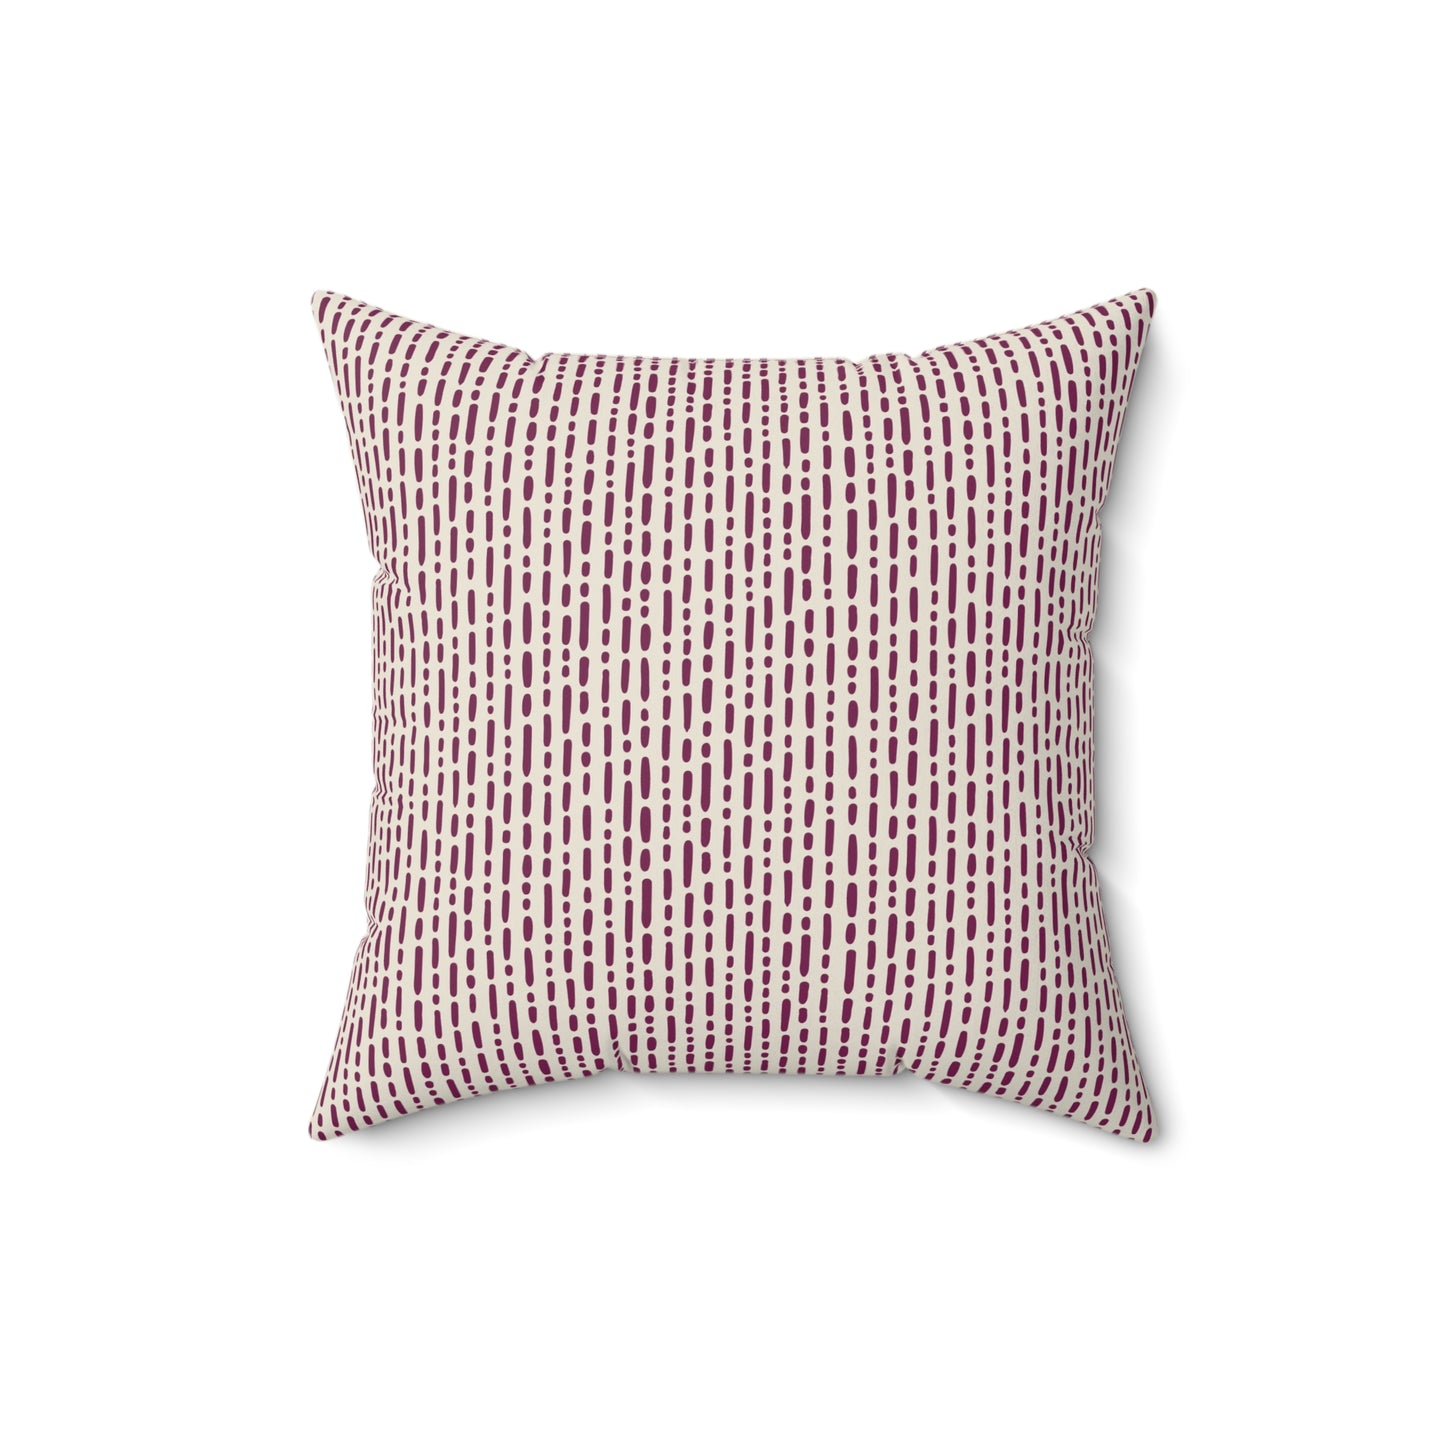 Boho Vibes Pattern 5 - Faux Suede Square Pillow